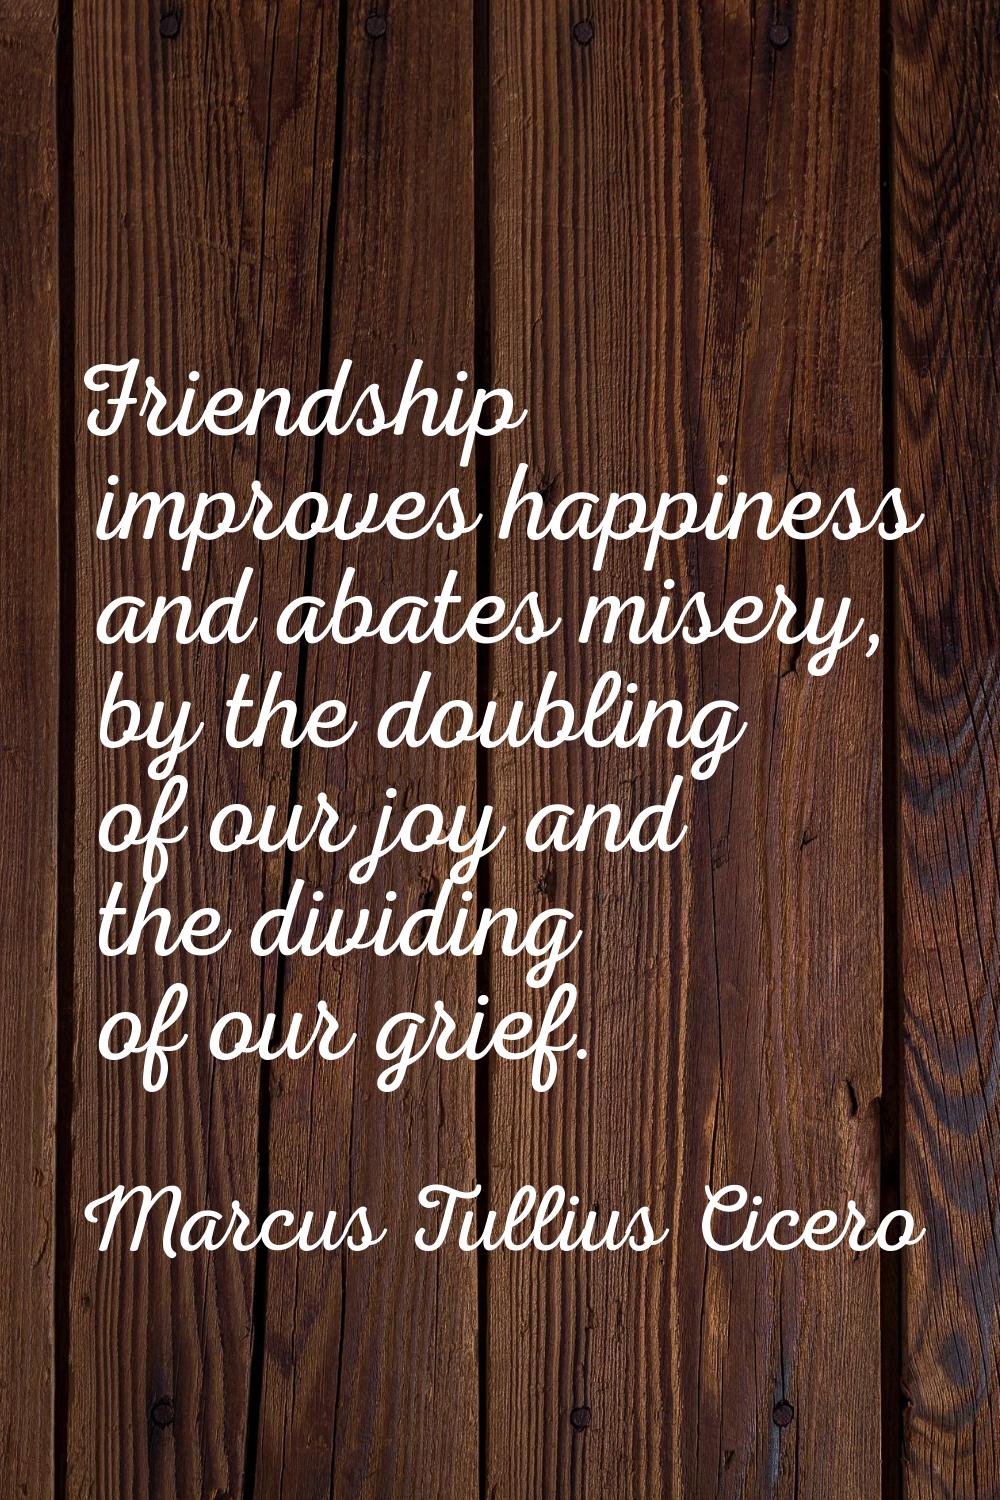 Friendship improves happiness and abates misery, by the doubling of our joy and the dividing of our